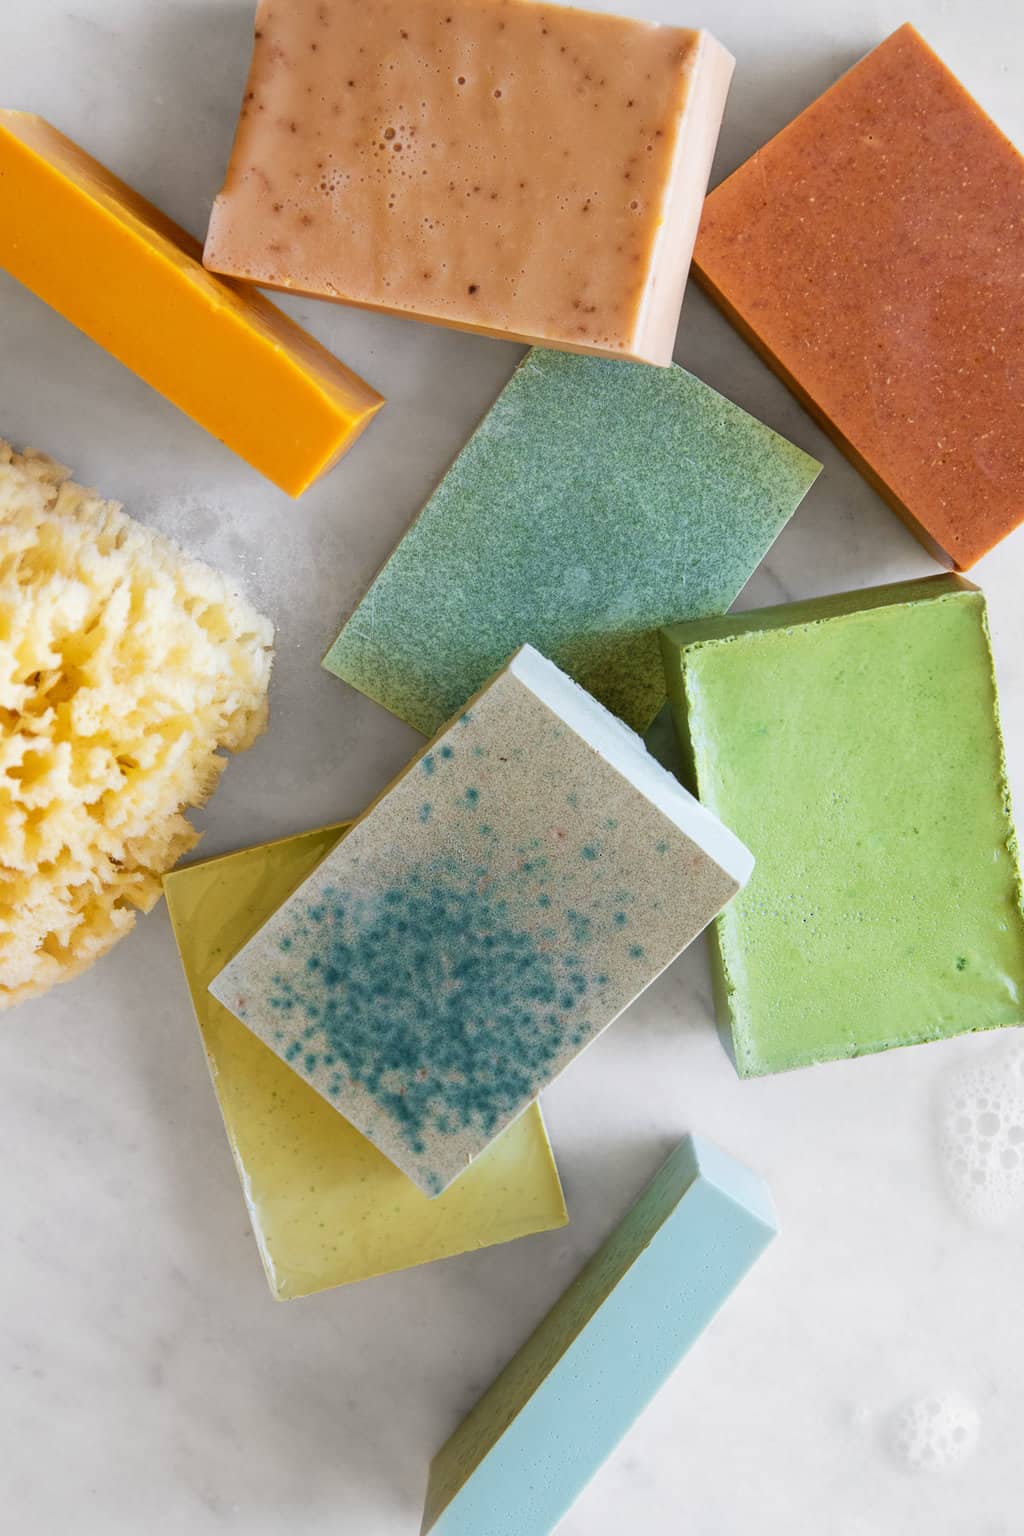 How to Color Soap: 56 Natural Ways To Make The Prettiest Homemade Soaps